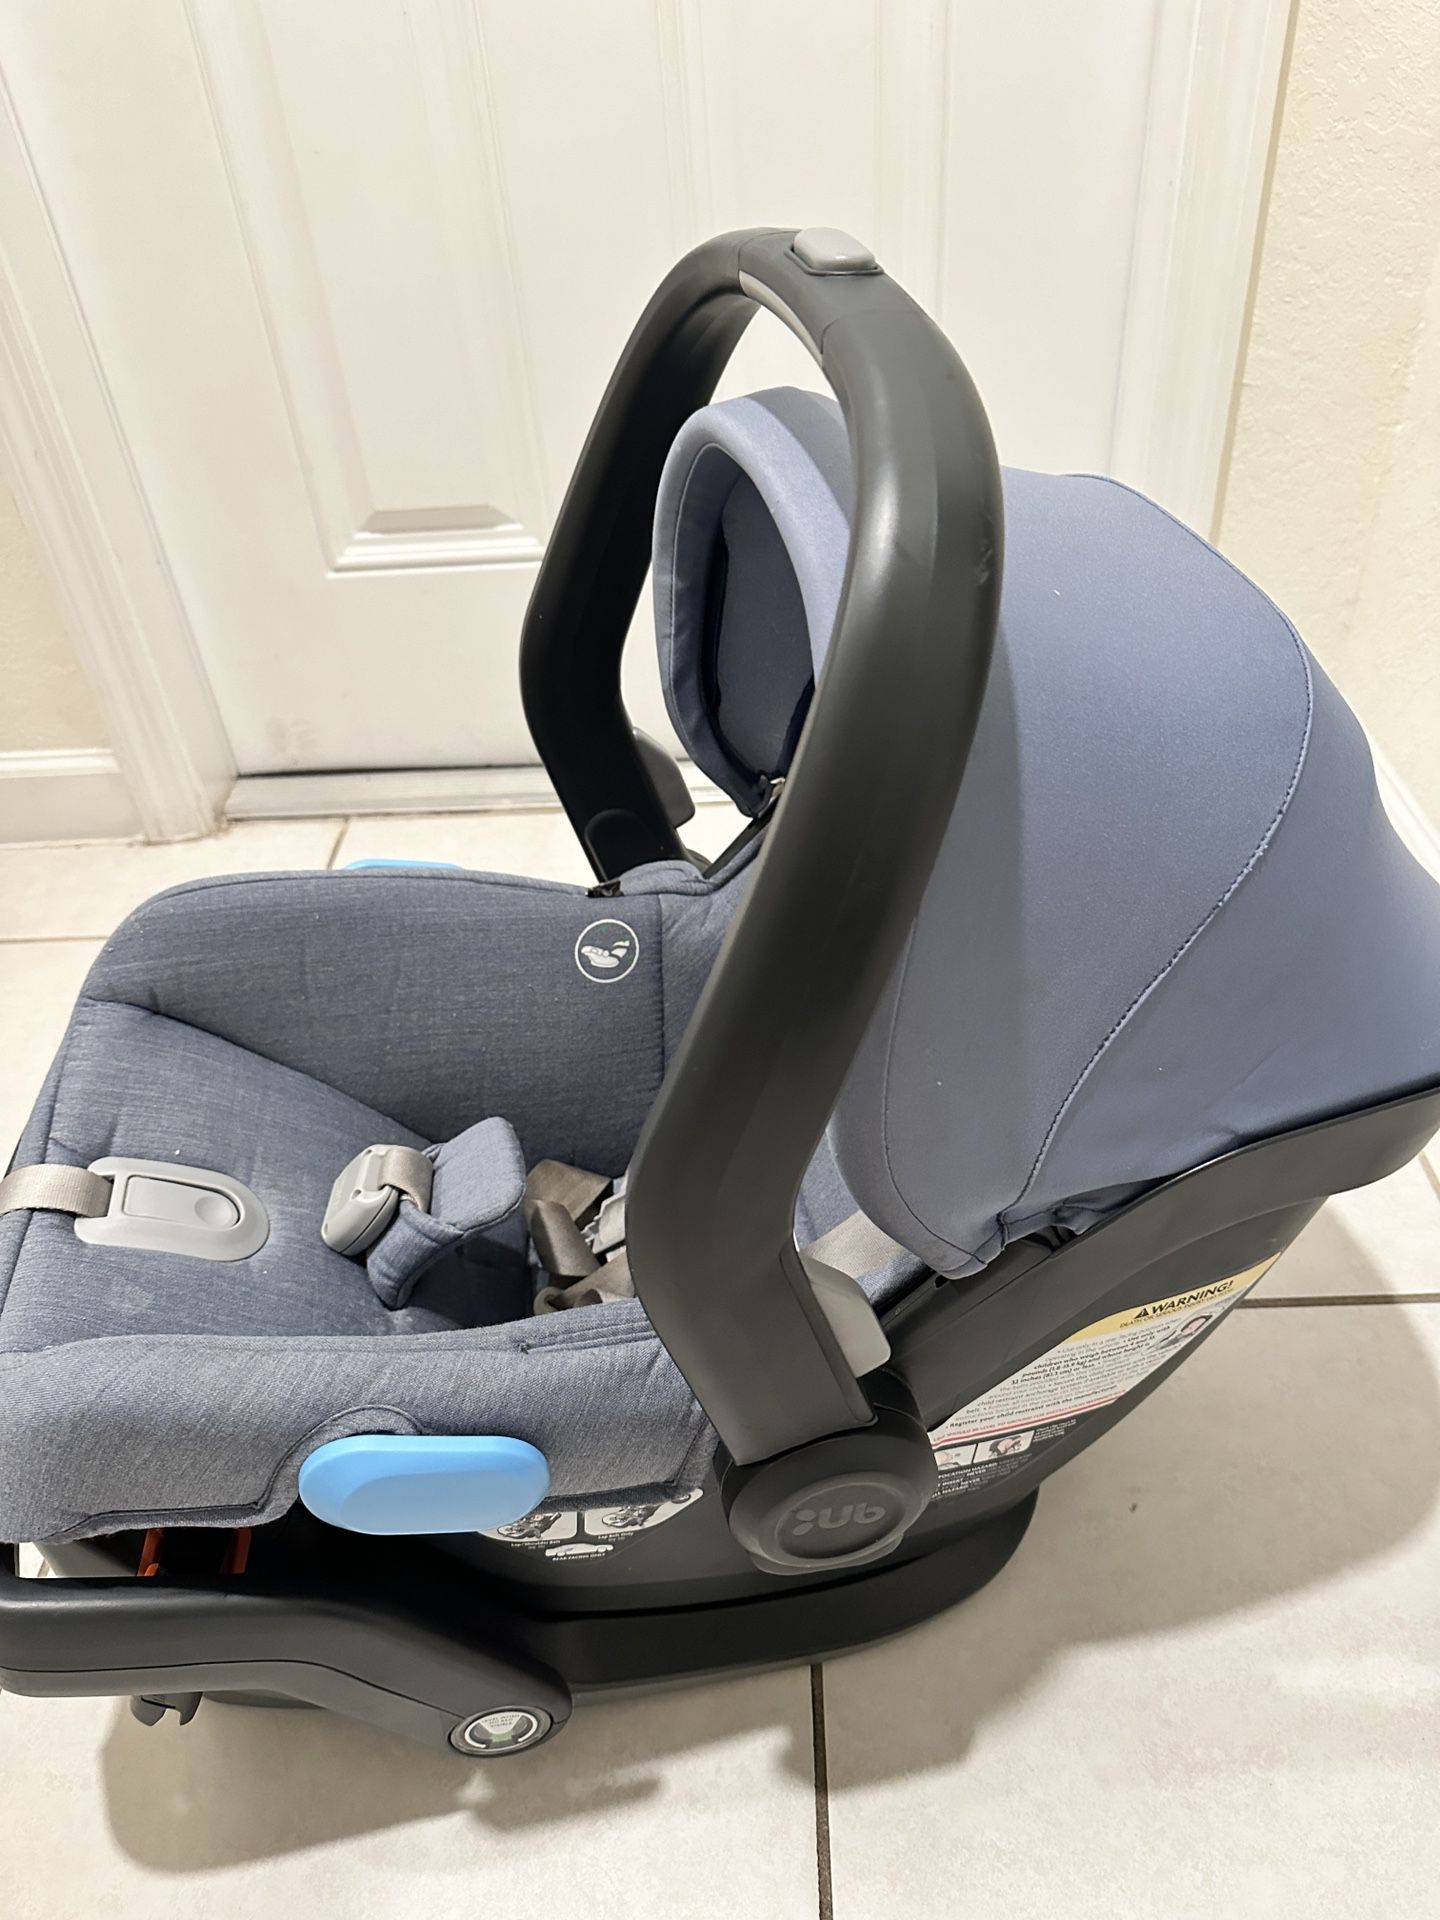 Uppababy Carseat